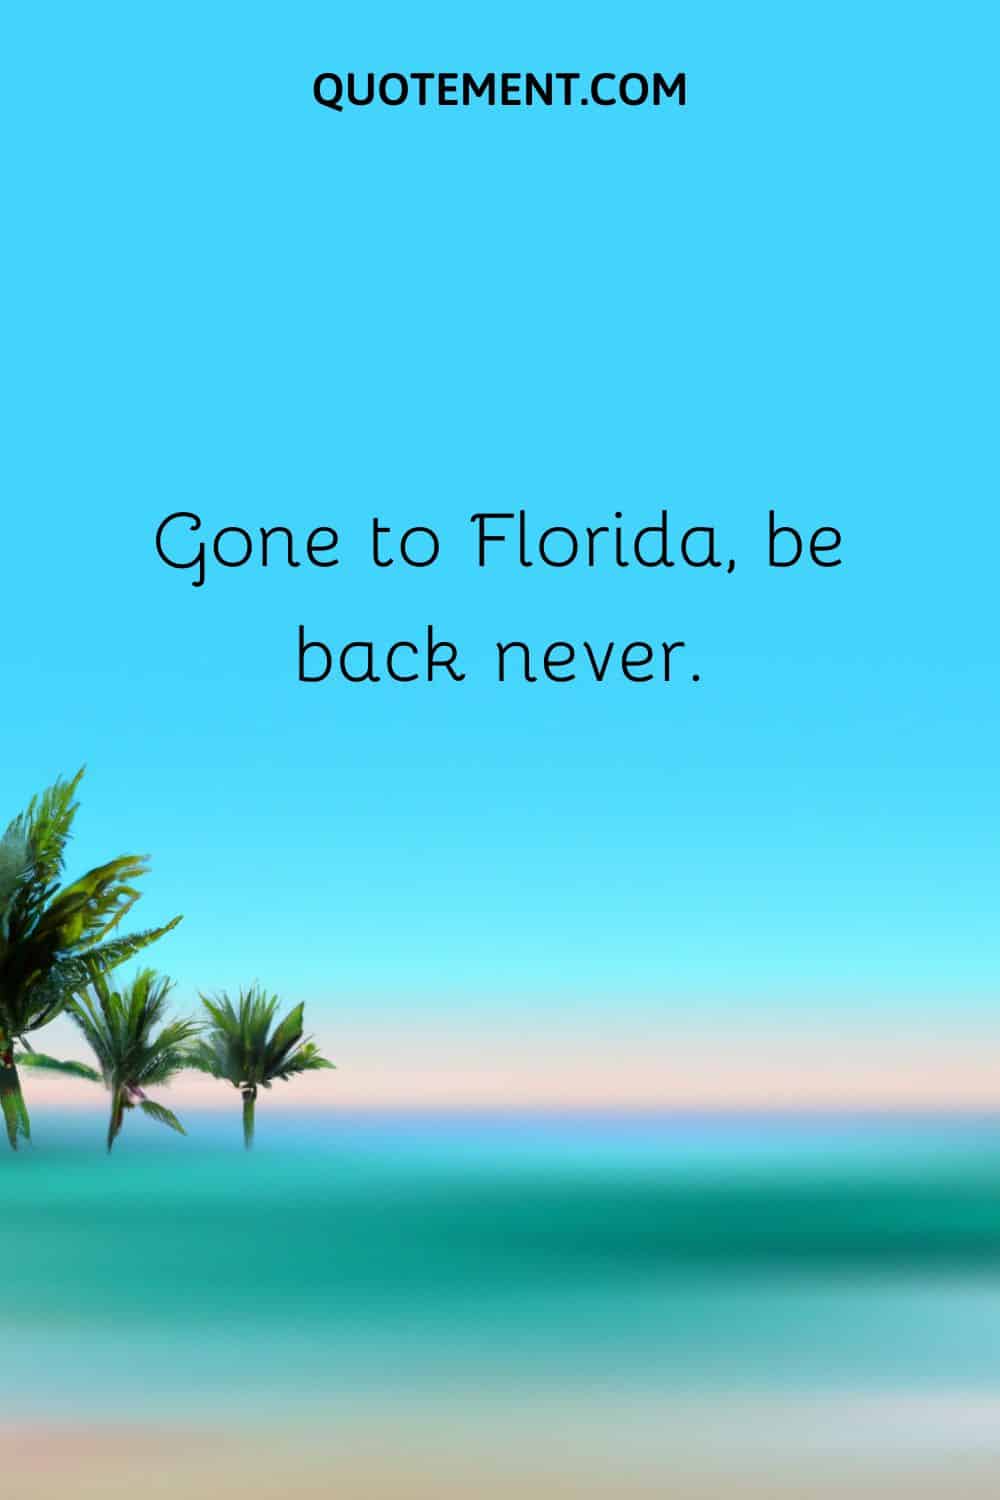 Gone to Florida, be back never